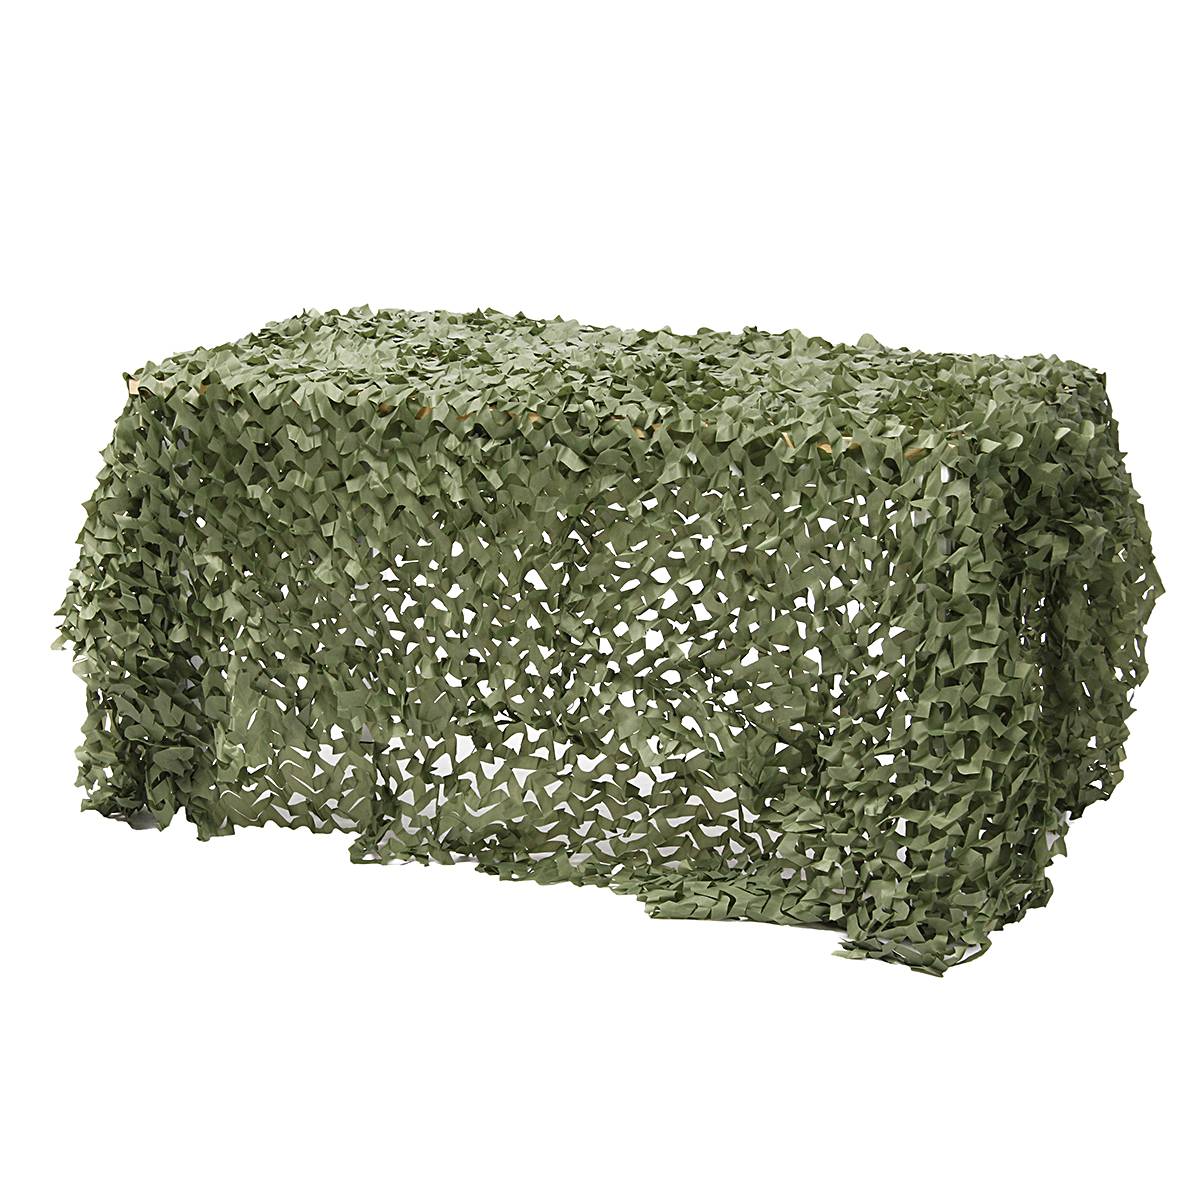 4mX2m-Camo-Netting-Camouflage-Net-for-Car-Cover-Camping-Woodland-Military-Hunting-Shooting-1090202